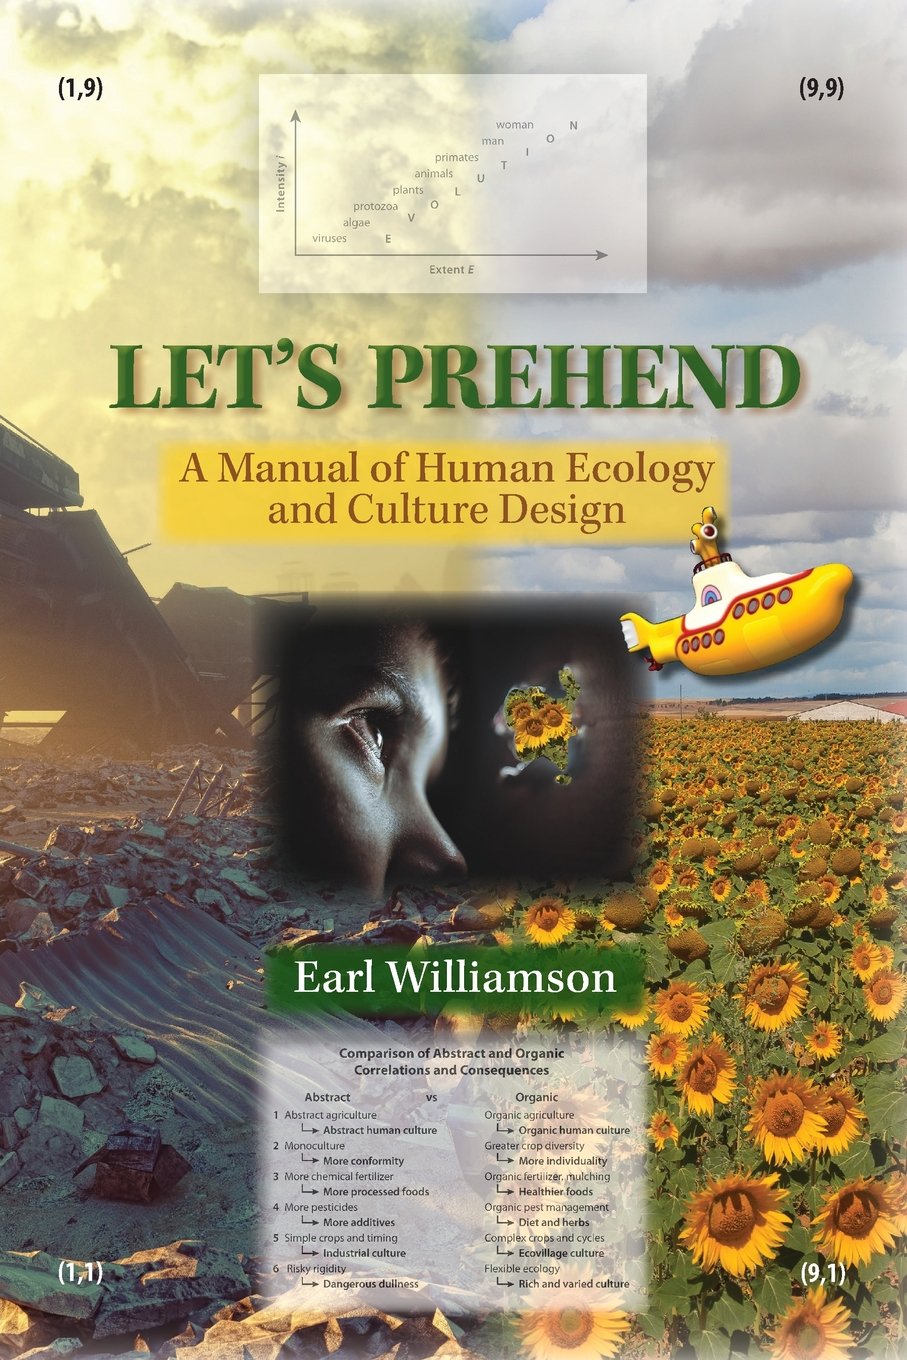 Large front cover image